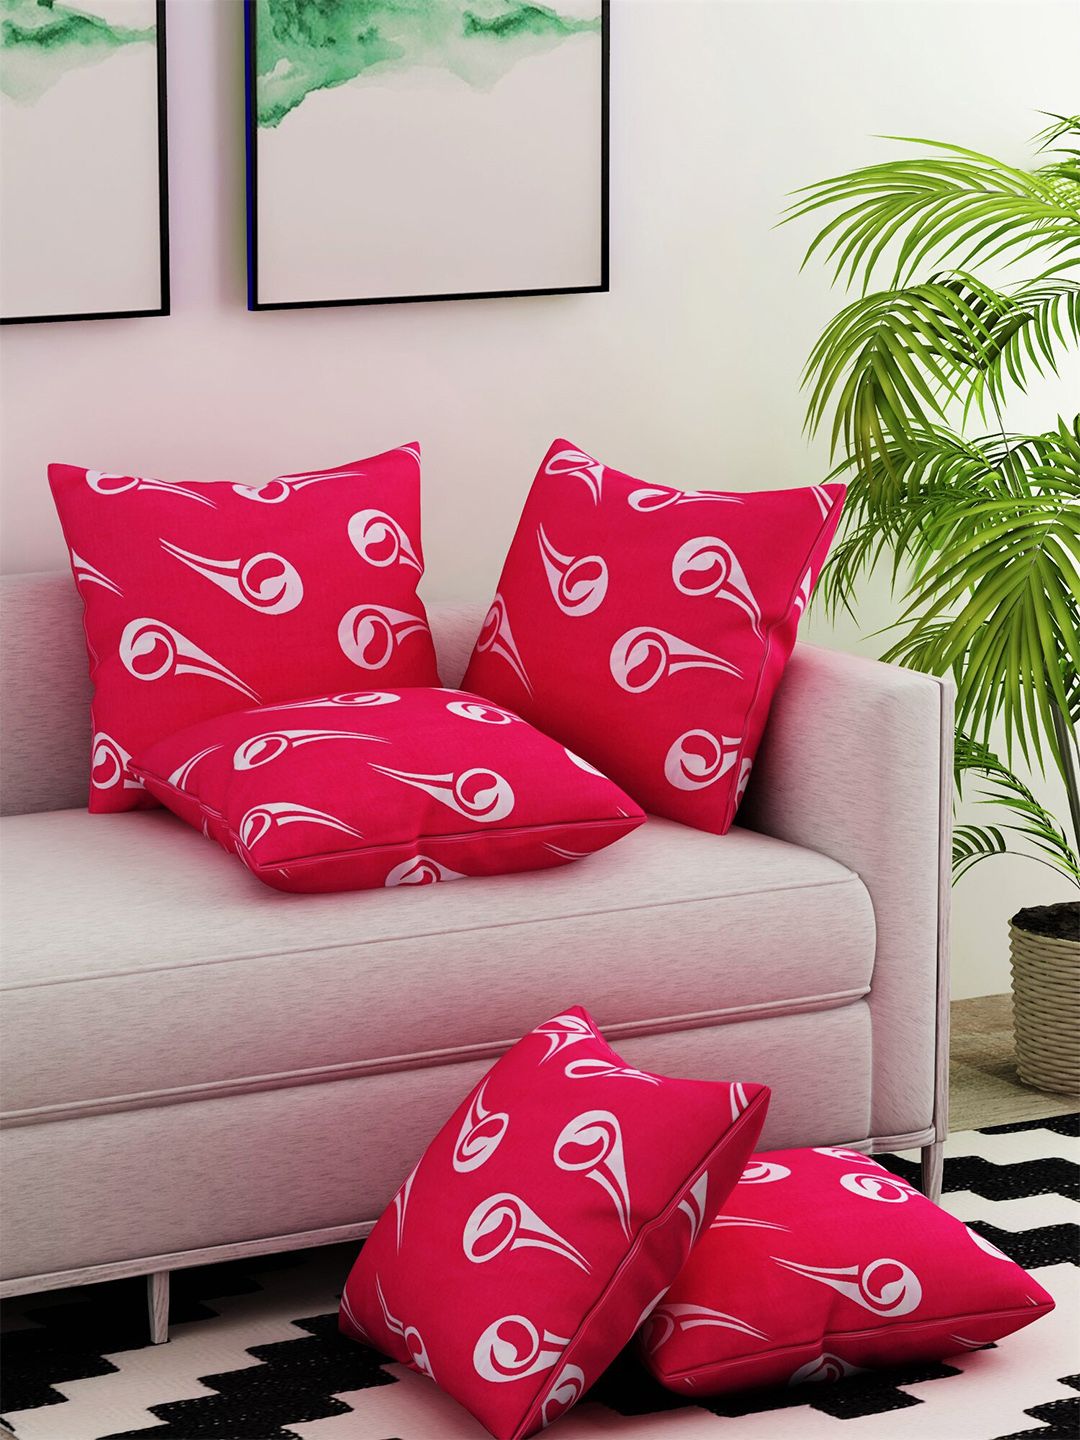 Salona Bichona Pink & White Set of 5 Abstract Square Cotton Cushion Covers Price in India